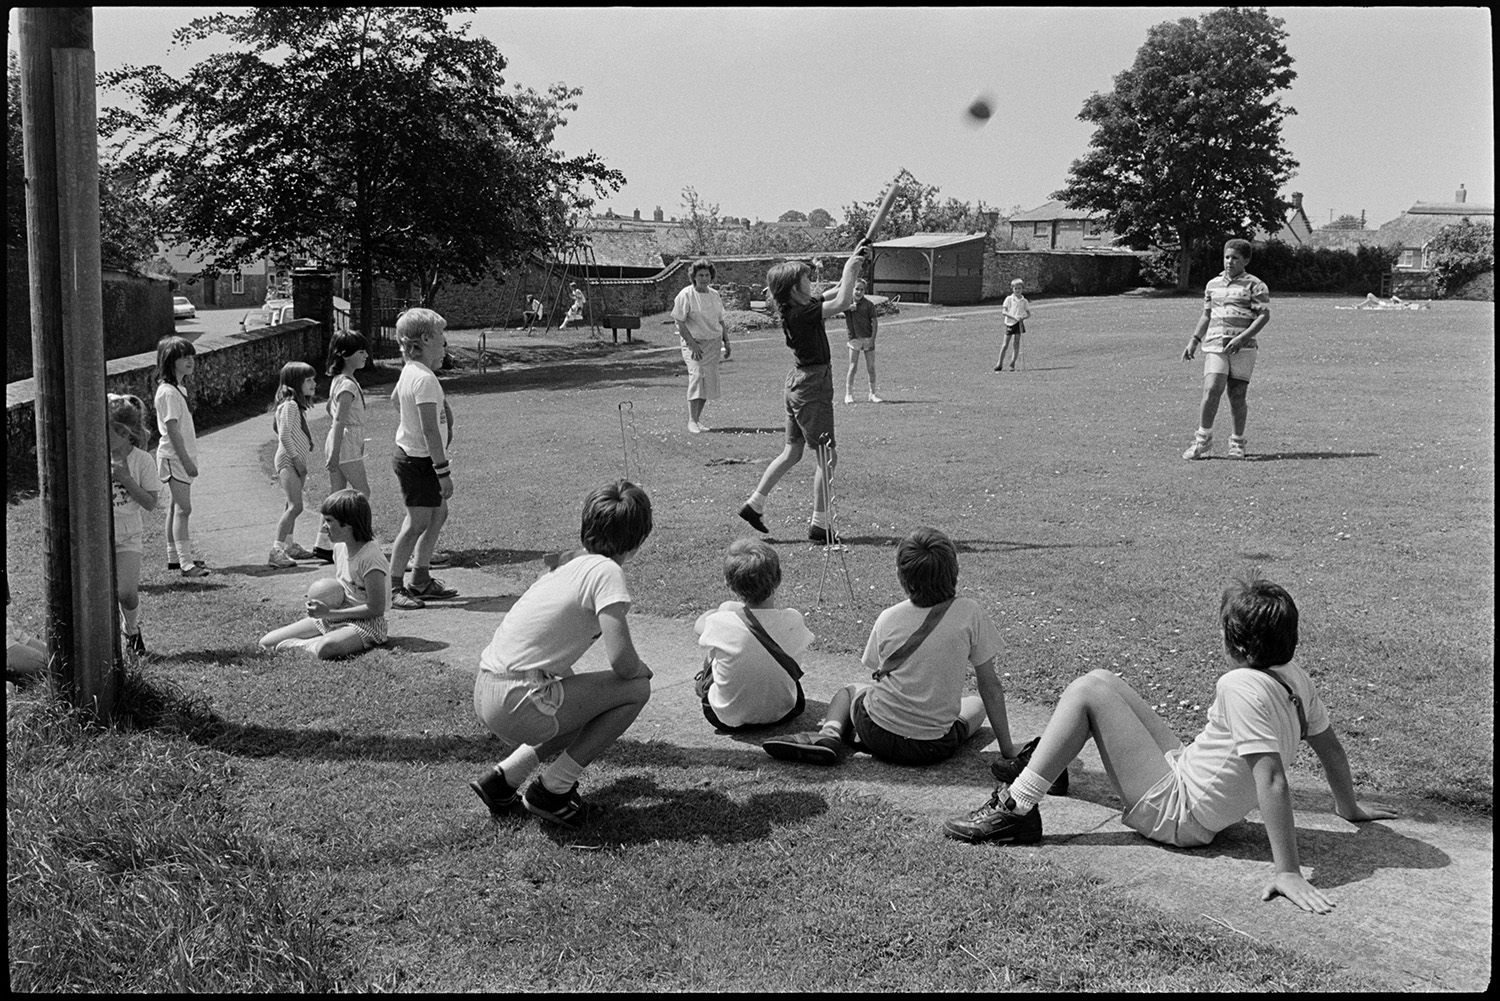 Children going through park to play rounders.
[Jean Harris supervising children from Chulmleigh Primary School playing rounders in Chulmleigh park. Some children are waiting to bat and some are sitting on the ground watching.]